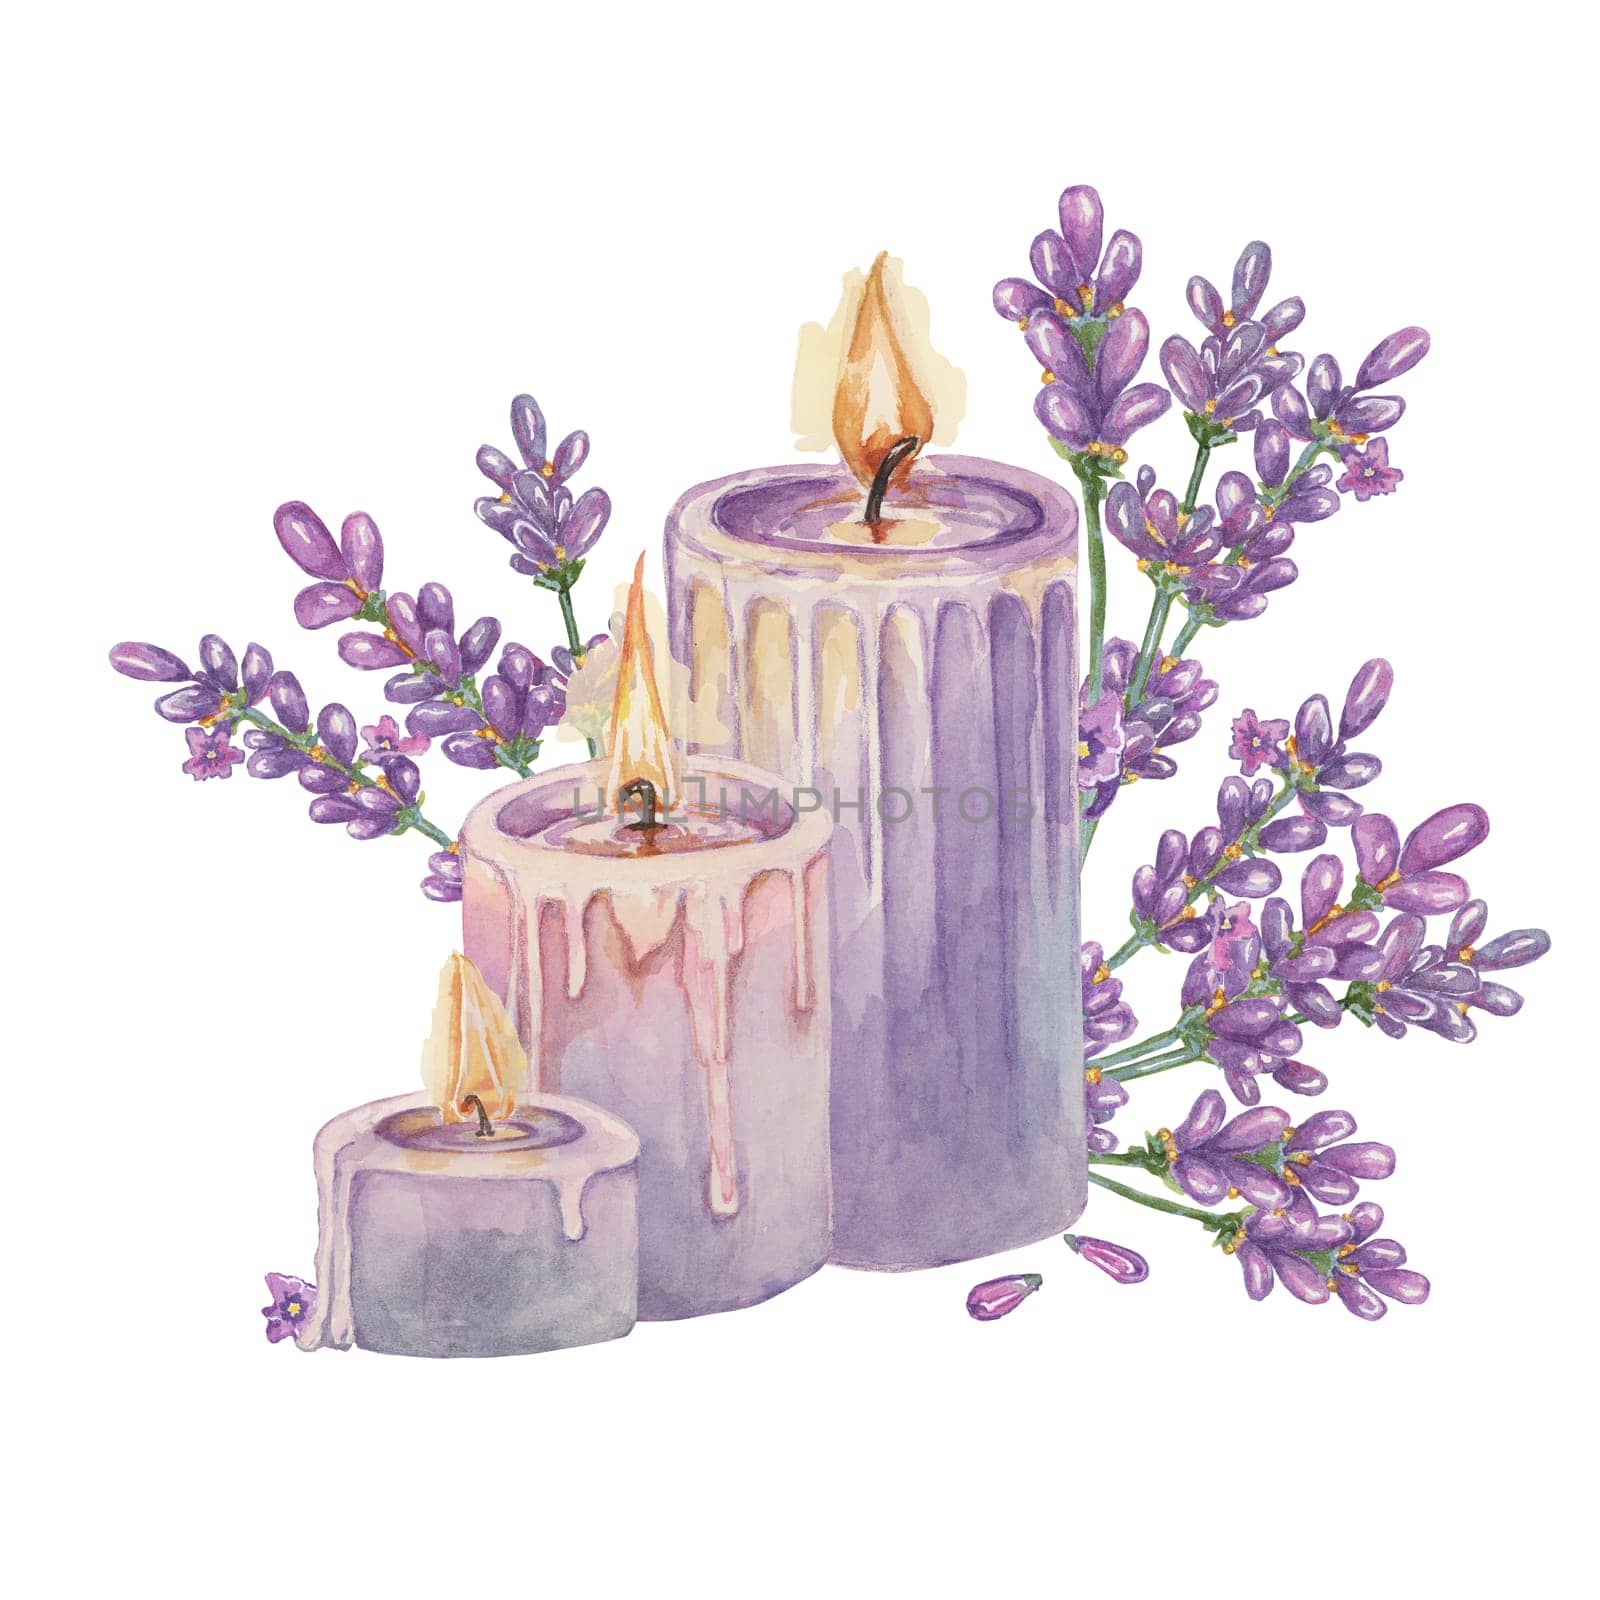 Lavender and purple wax candle for home fragrance. Home spa aromatherapy relaxing watercolor illustration. Hand drawn clipart for beauty, cosmetics, labels, organic products, wellness and packaging